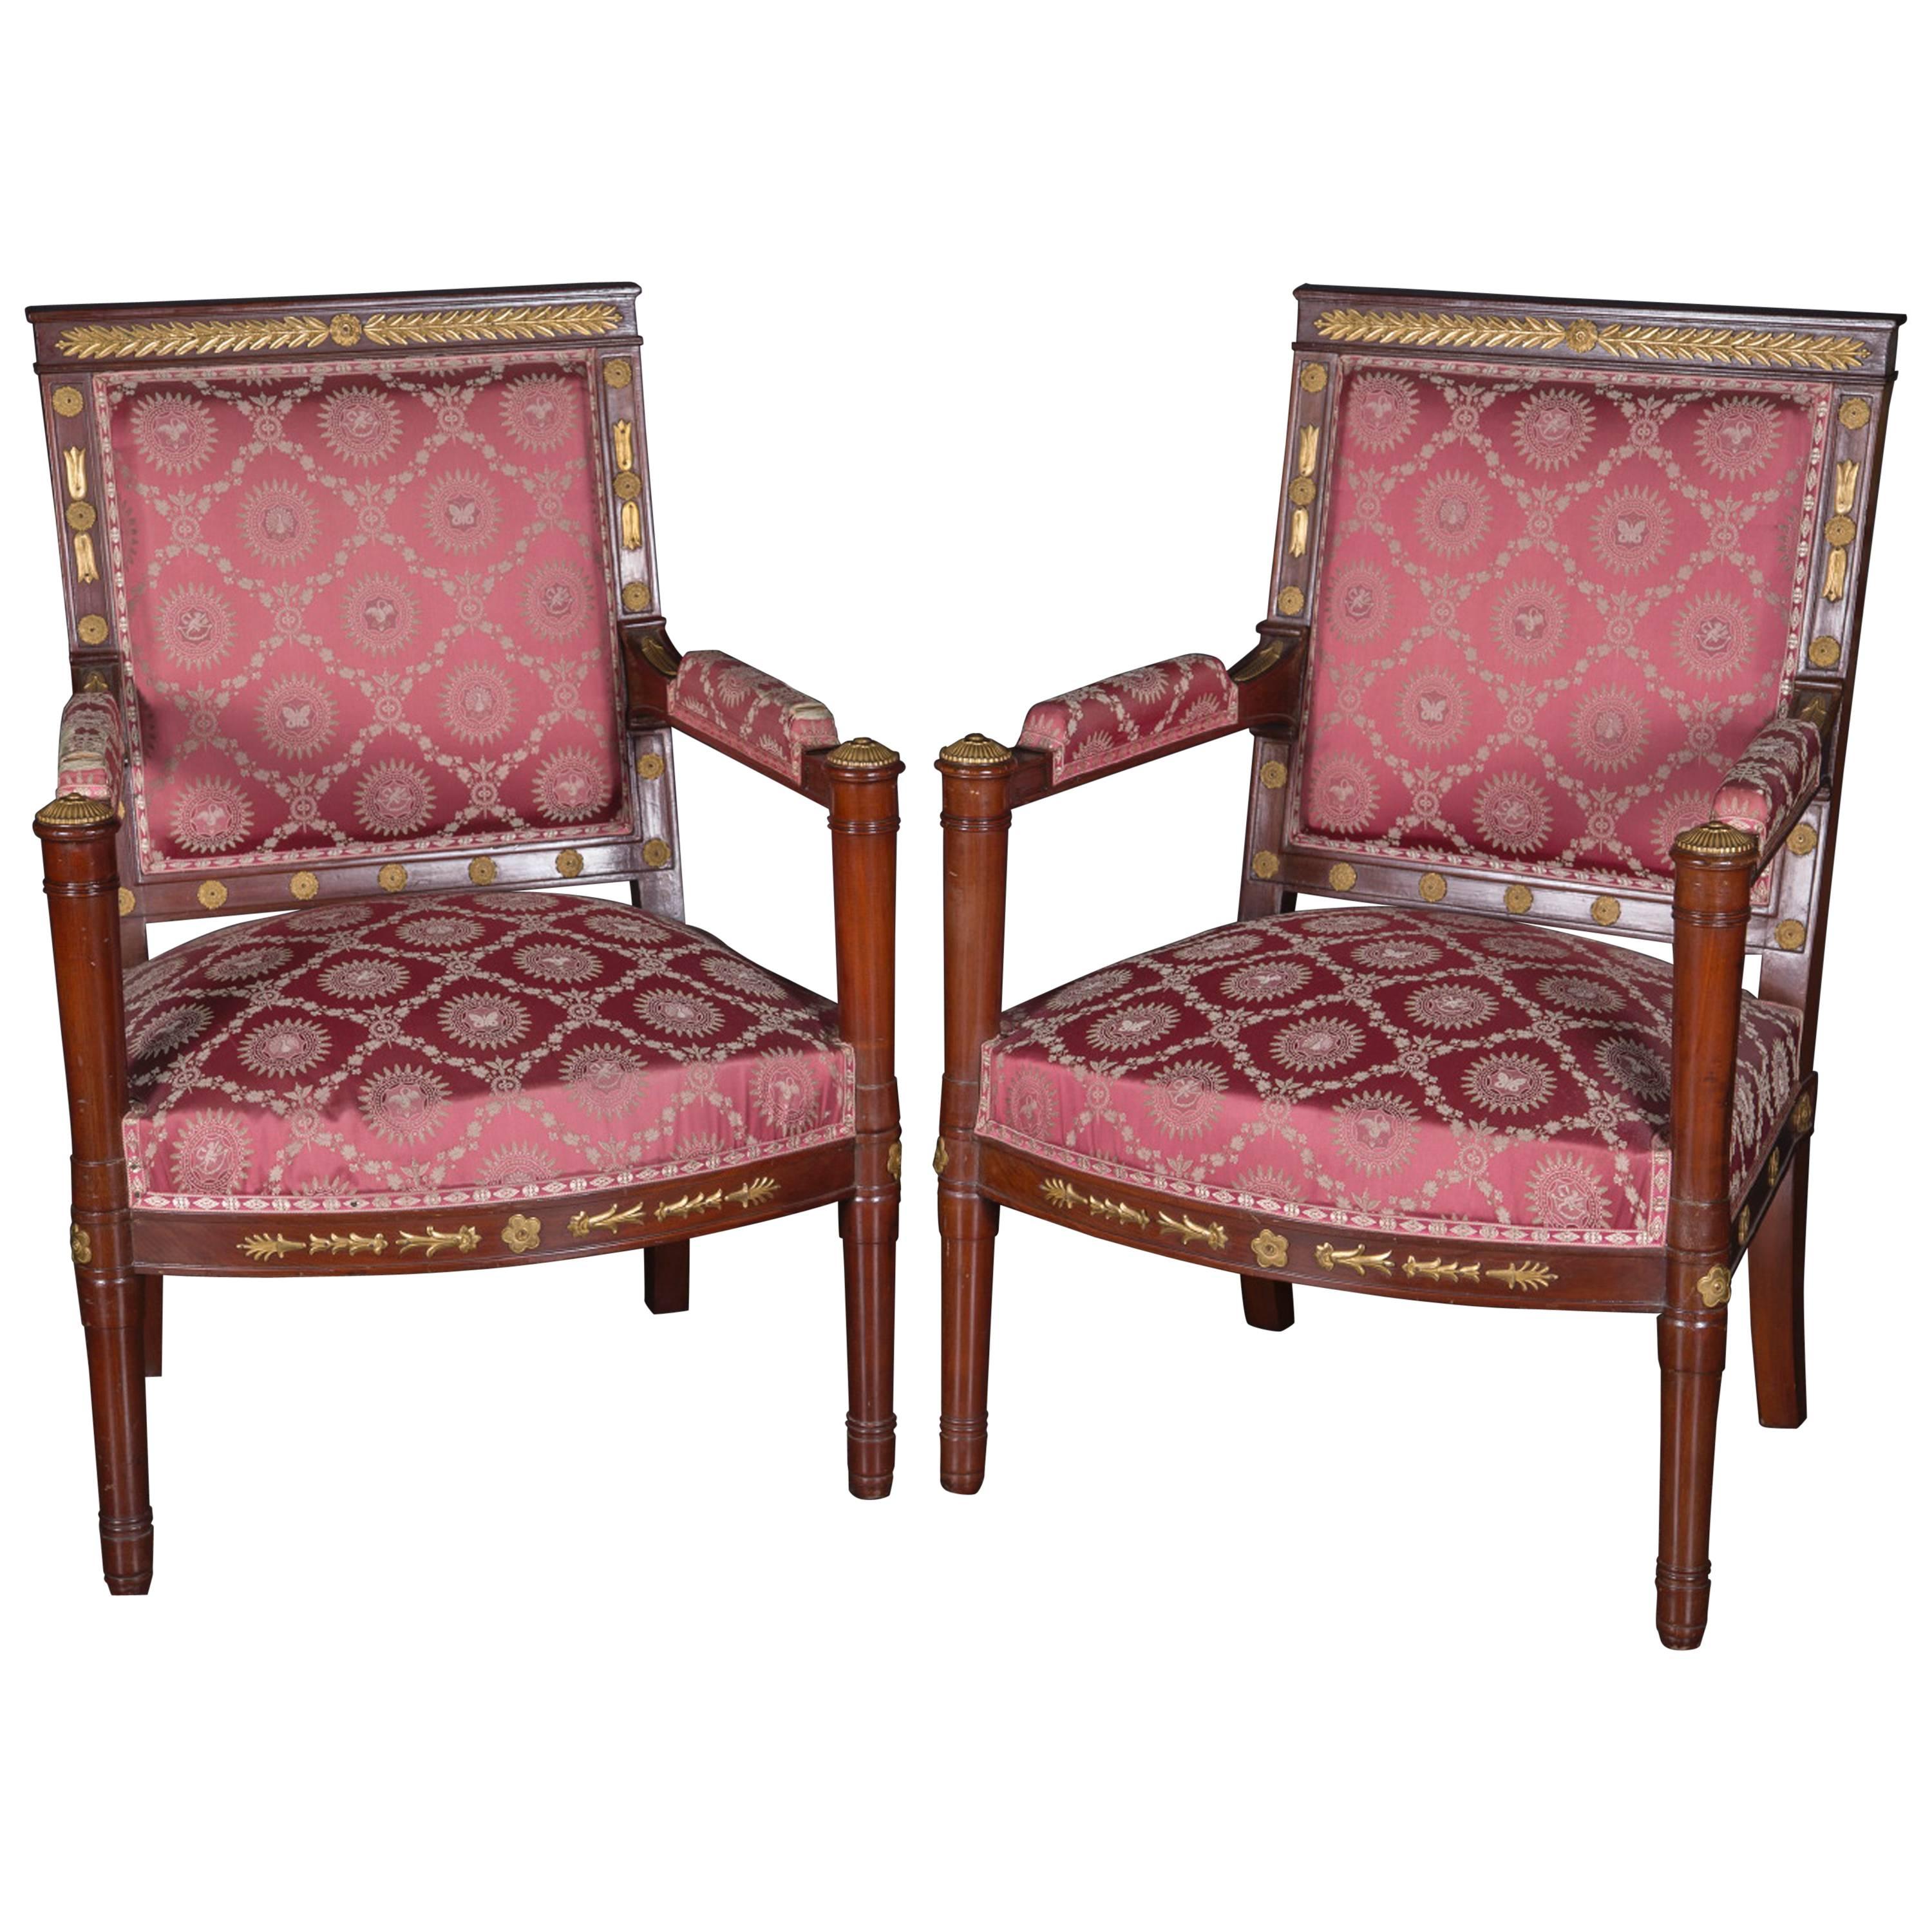 Pair of 19th Century Napoleon III Mahogany Chairs with Bronze d’Ore Details For Sale